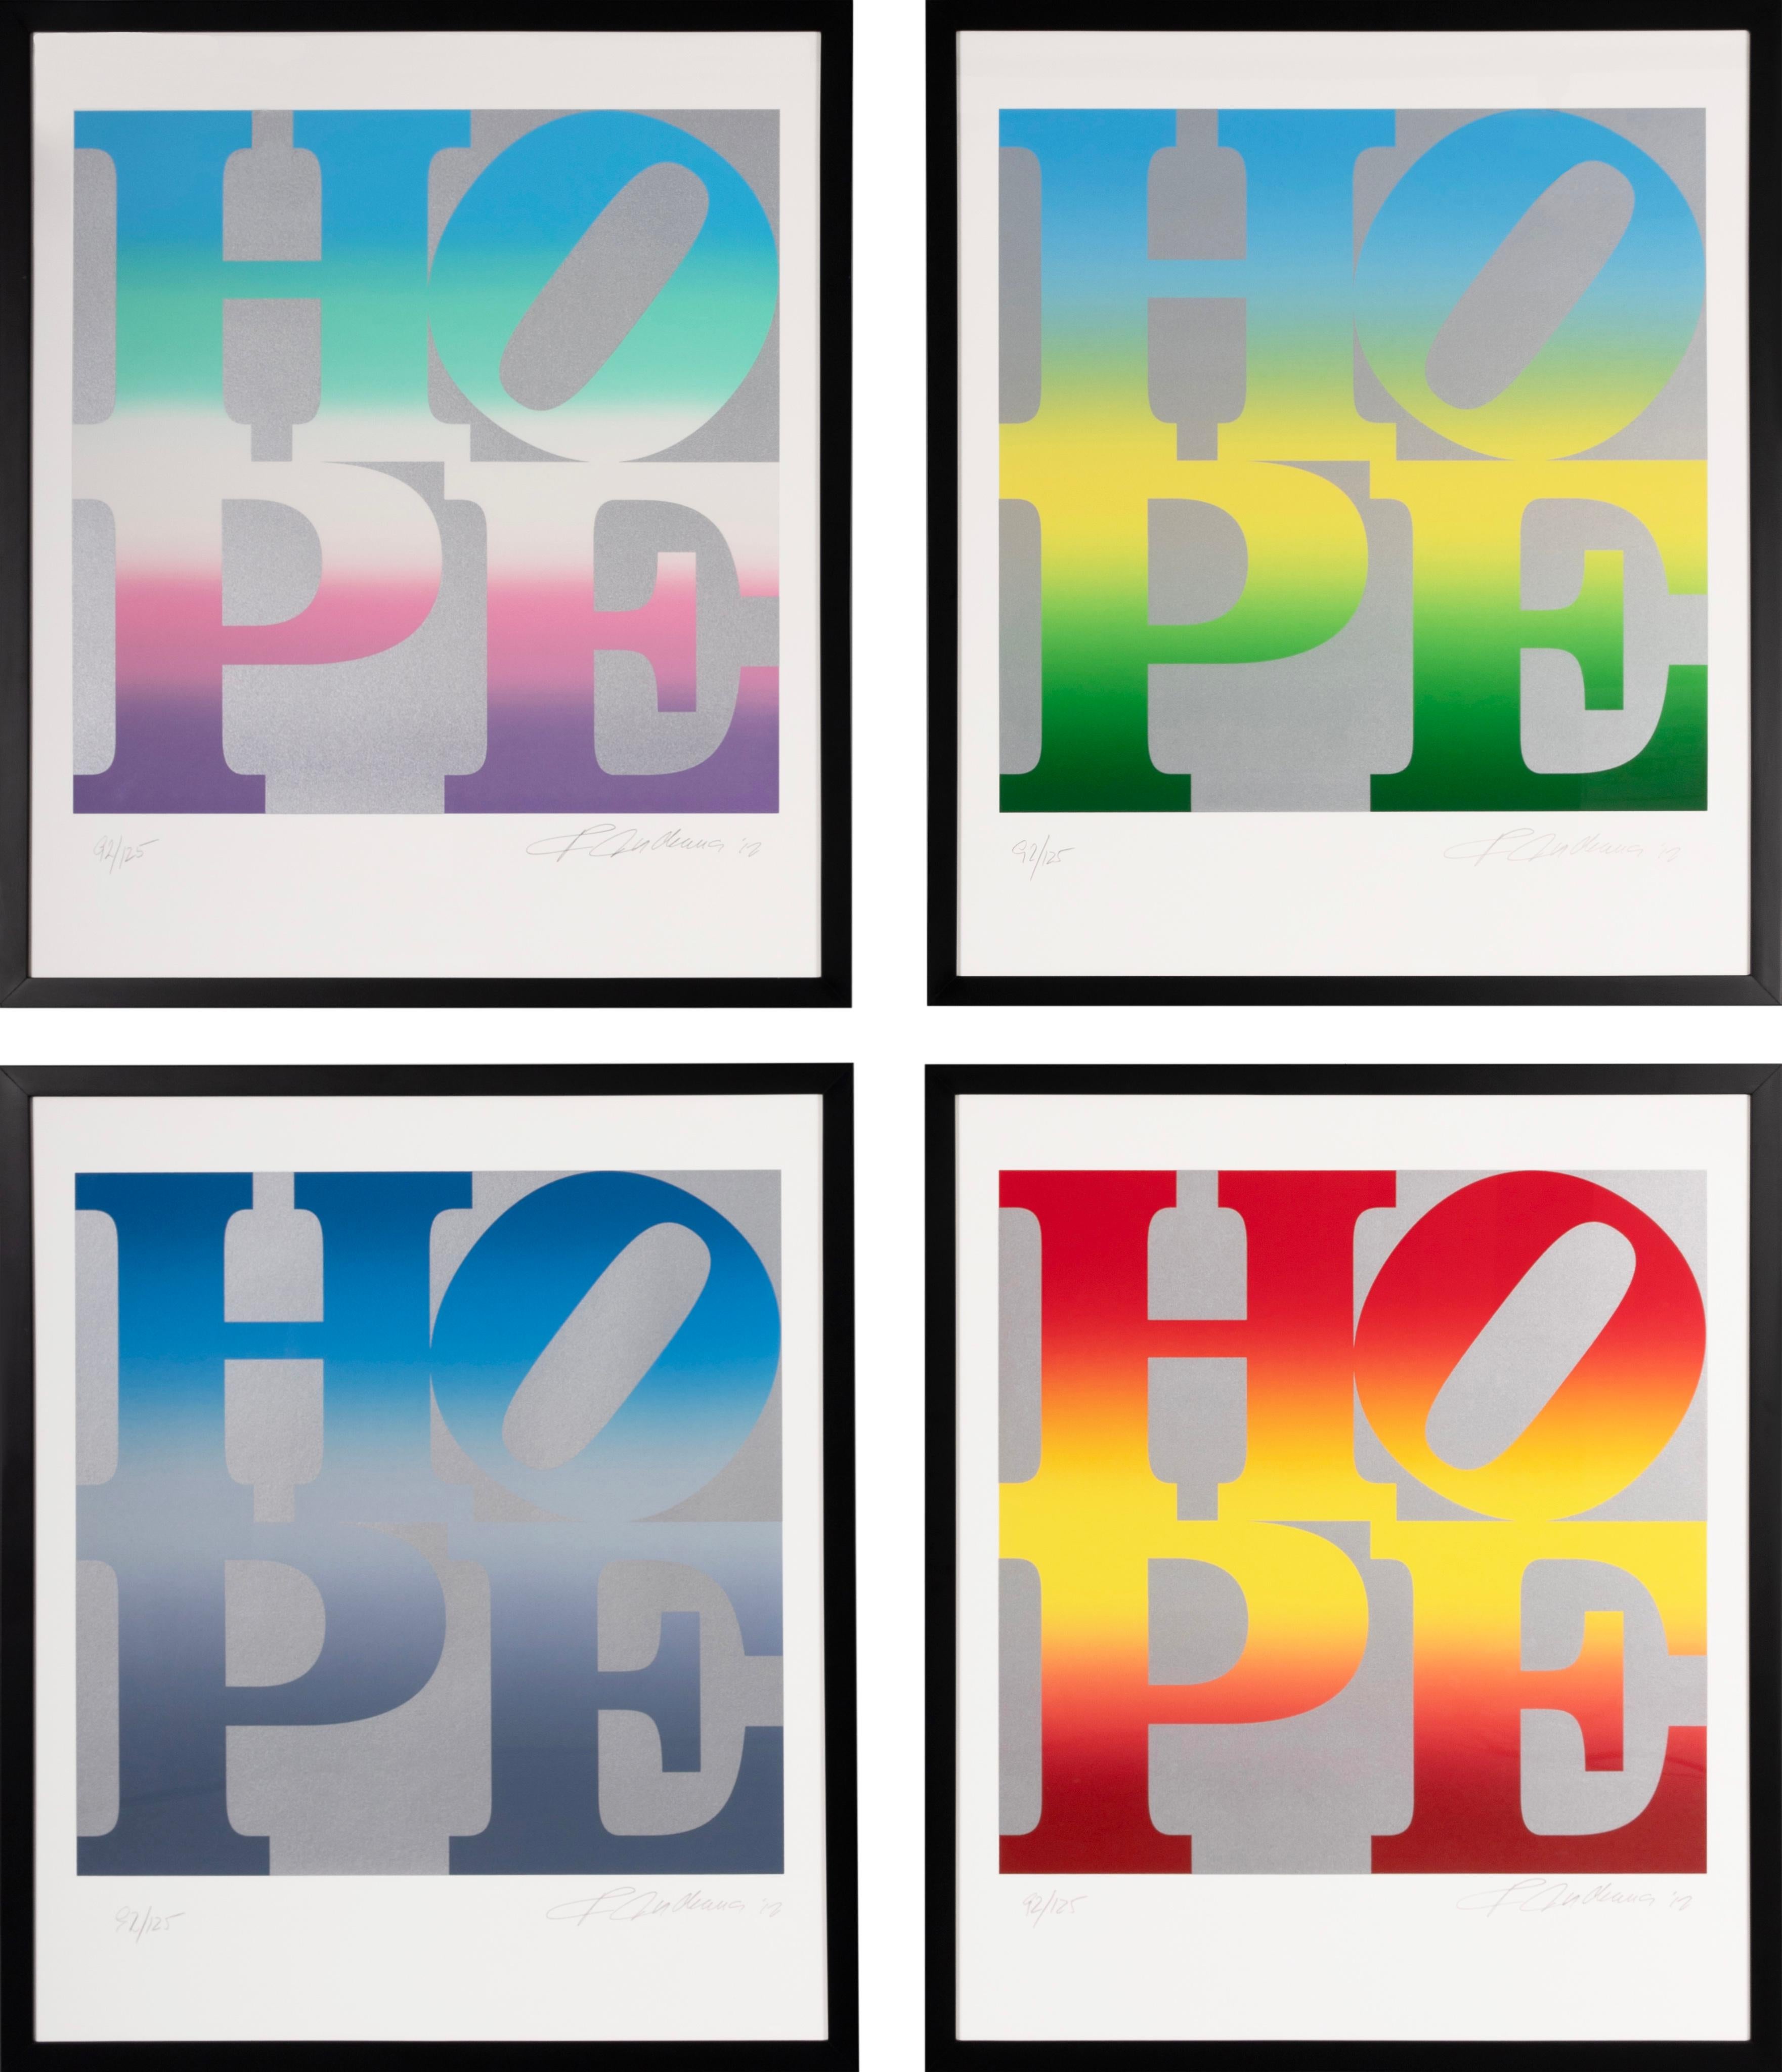 Robert Indiana is one of the central figures of the Pop Art movement, taking his inspiration from commercial signs, claiming: “There are more signs than trees in America. There are more signs than leaves. So I think of myself as a painter of